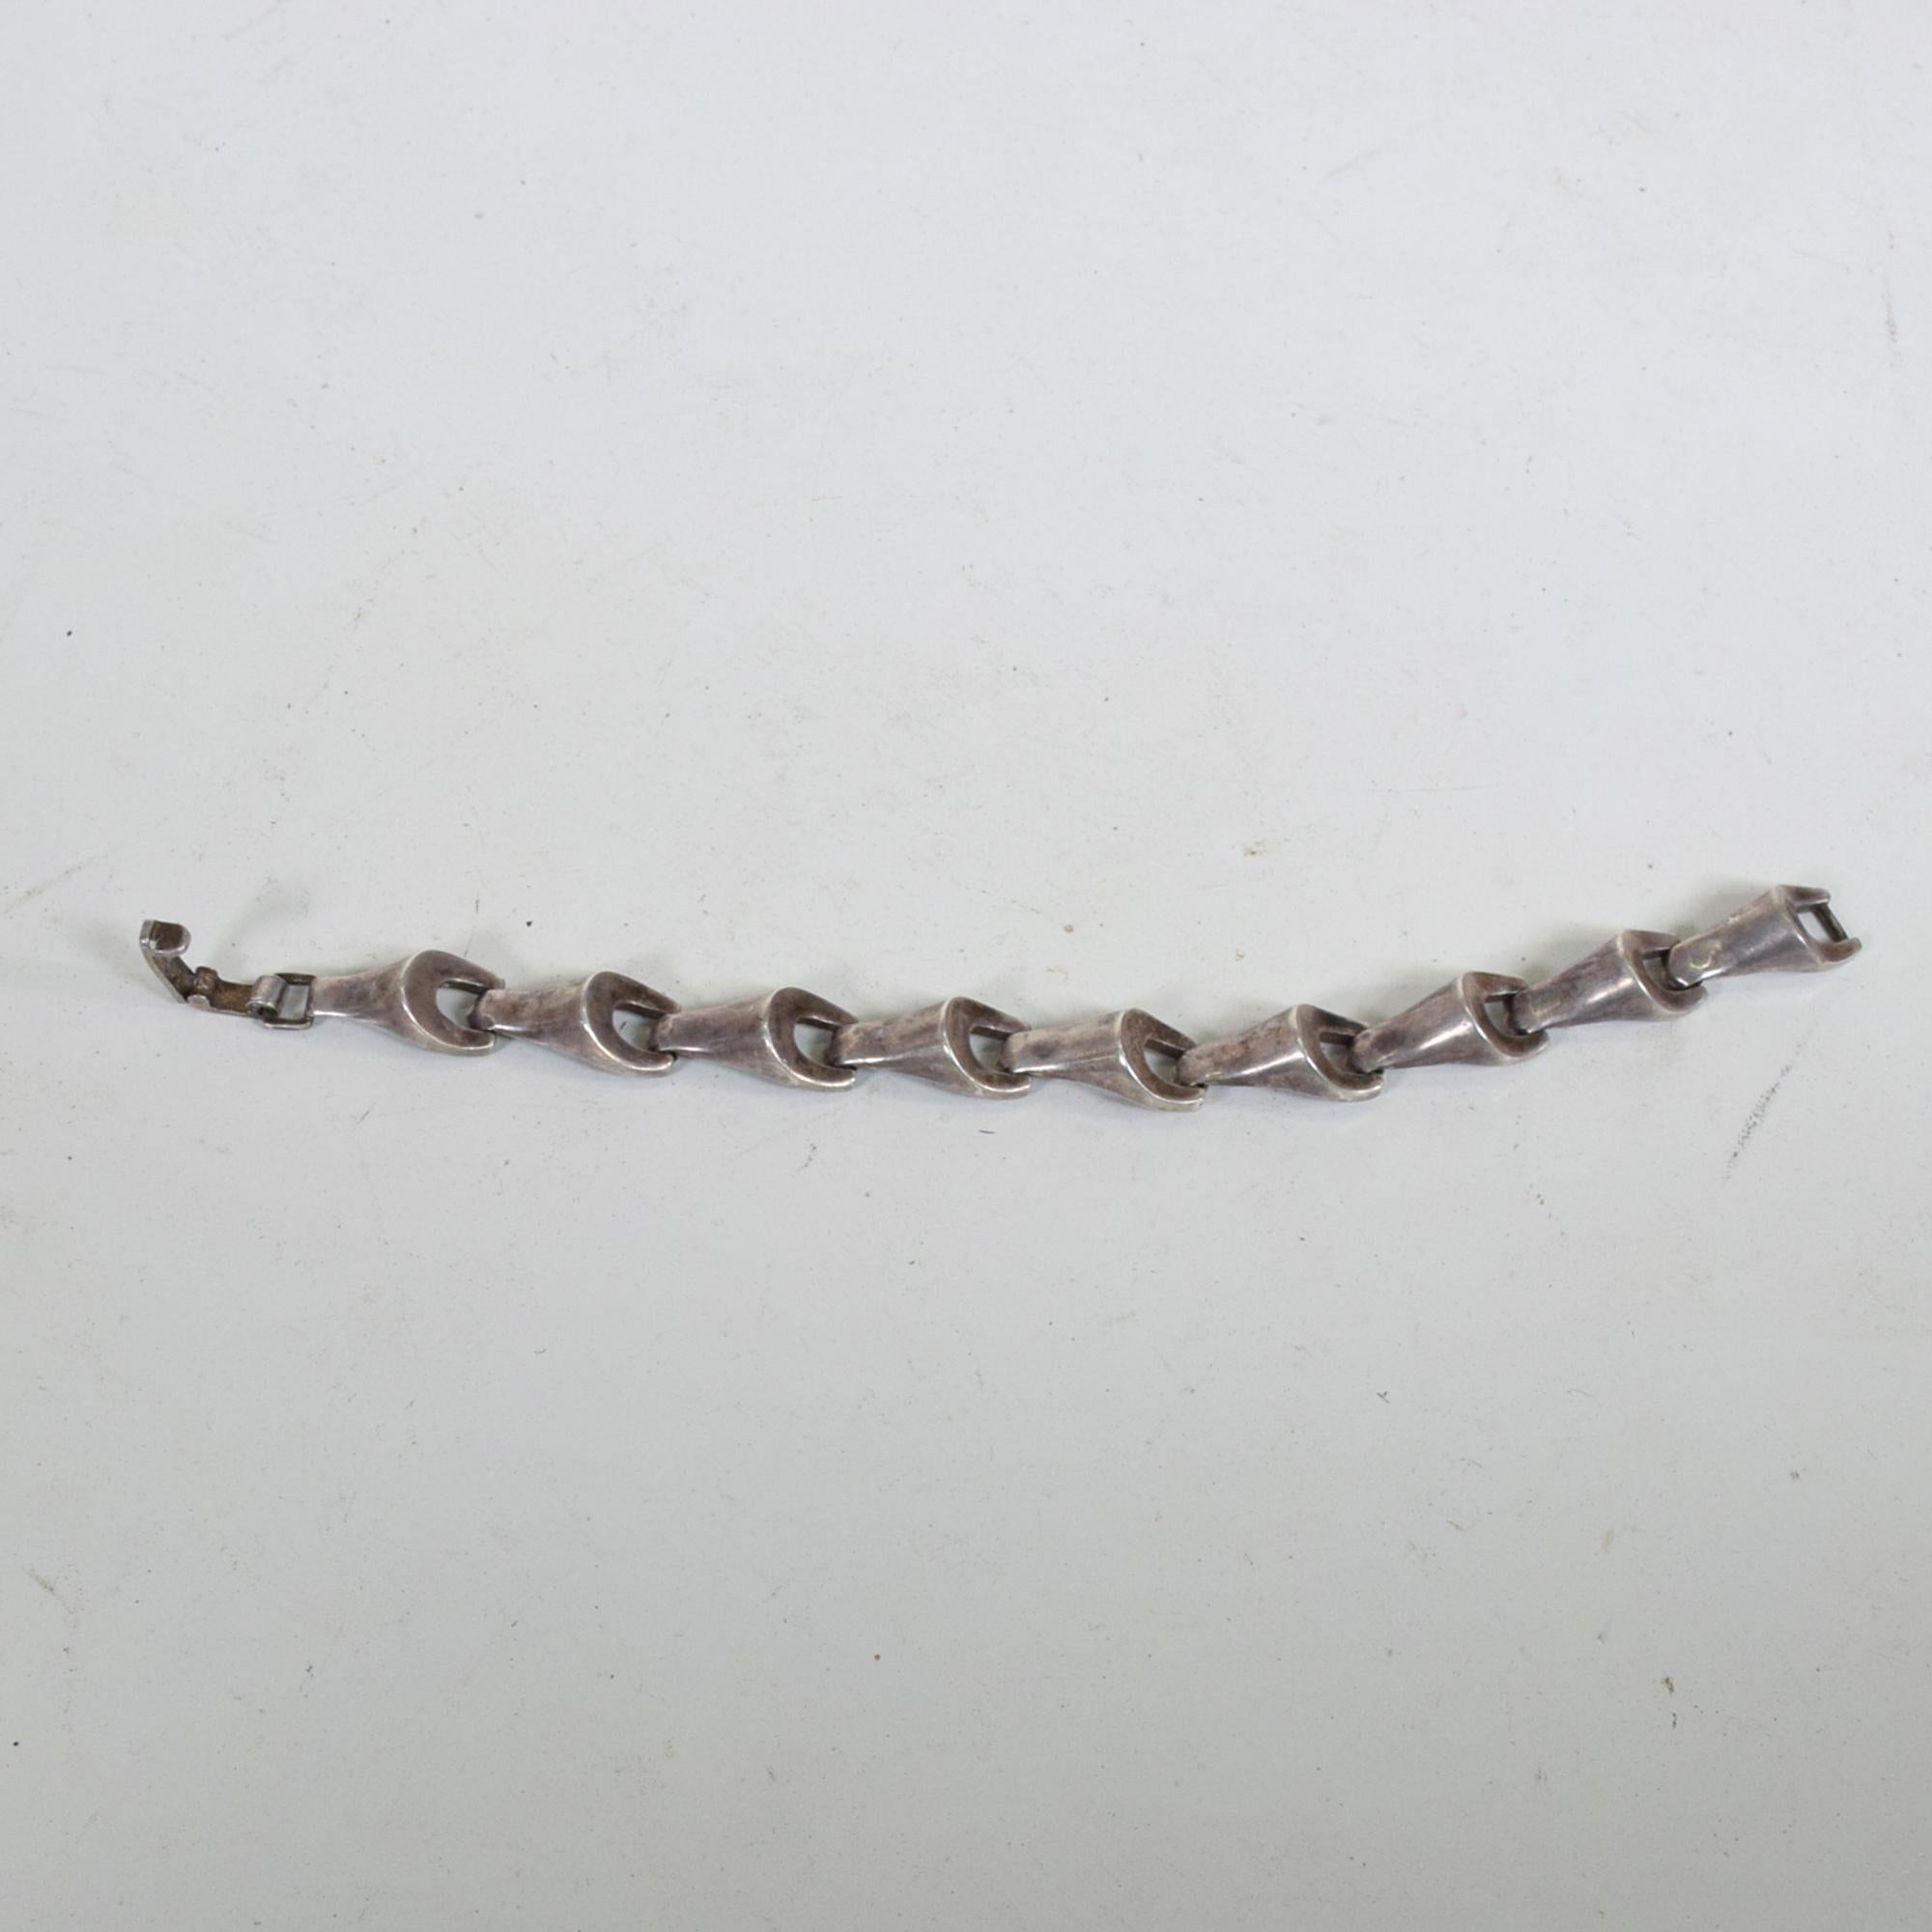 Mid-Century Modern silver bracelet attributed to Antonio Belgiorno. Made in Argentina. 1950s
Fabulous modernist design in geometrical link form.
Silver purity 900
Dimensions: 7.75 W x .5 D x .38 H
Original preowned unrestored condition piece